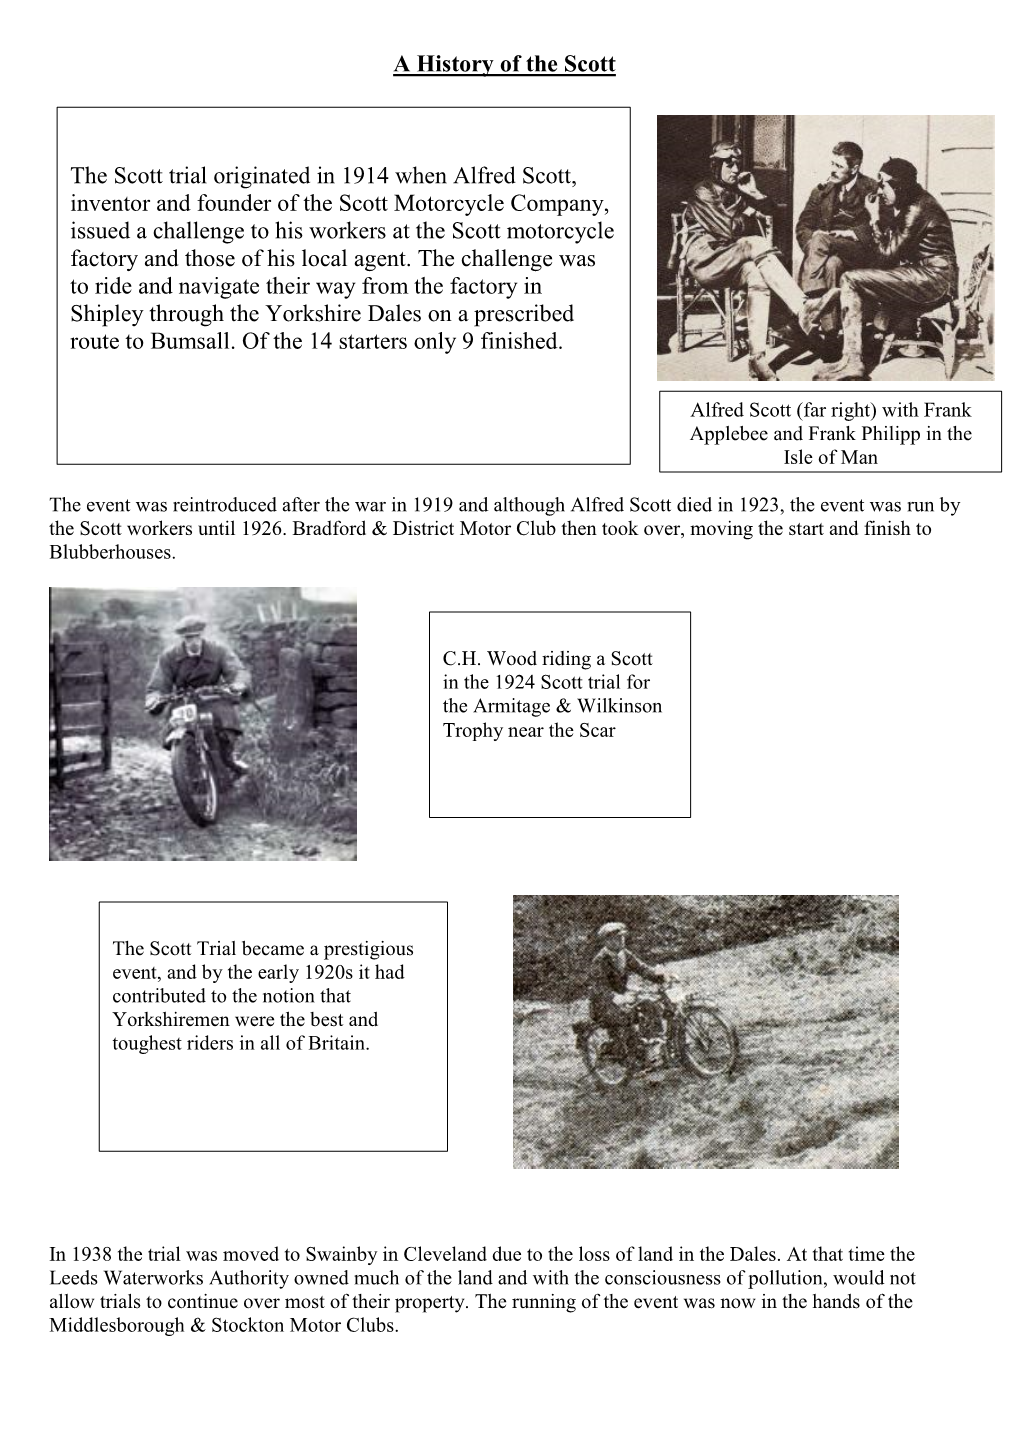 A History of the Scott the Scott Trial Originated in 1914 When Alfred